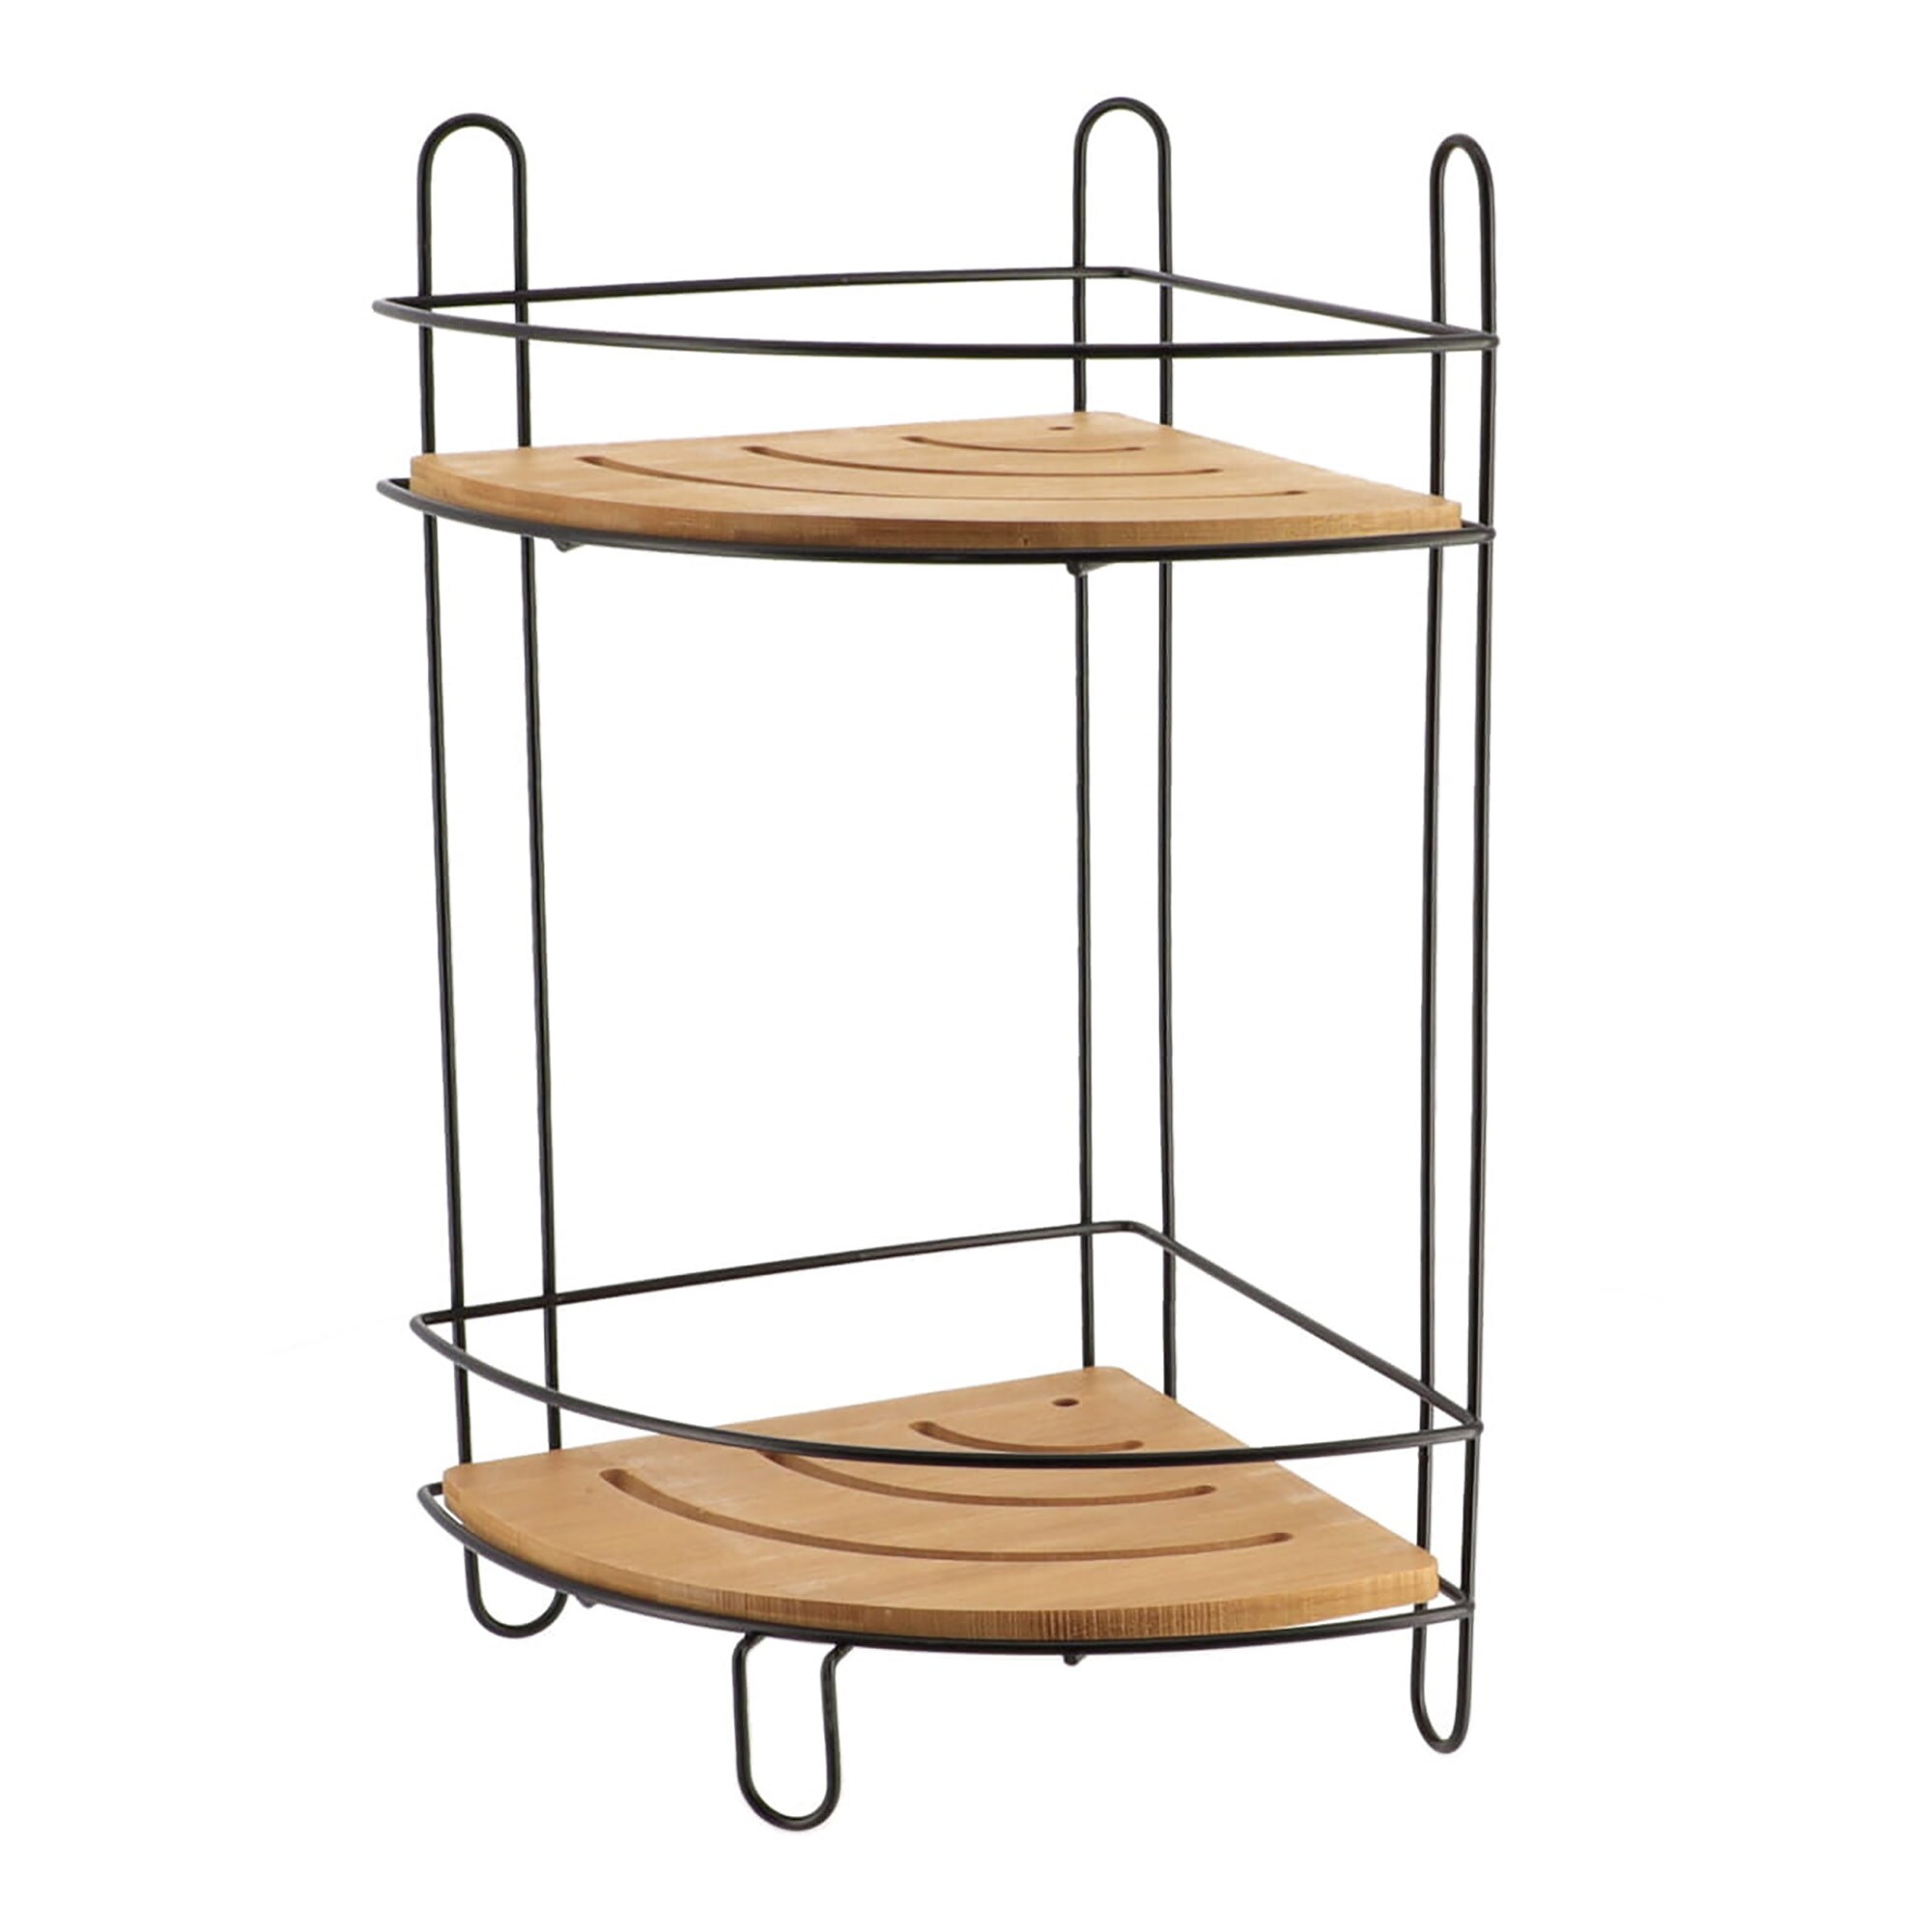 https://ak1.ostkcdn.com/images/products/is/images/direct/f722ec049a70cc06fd2c13e17b1d3a6c7ff51d14/Organizer-Metal-Wire-Corner-Shower-Caddy-Bamboo.jpg